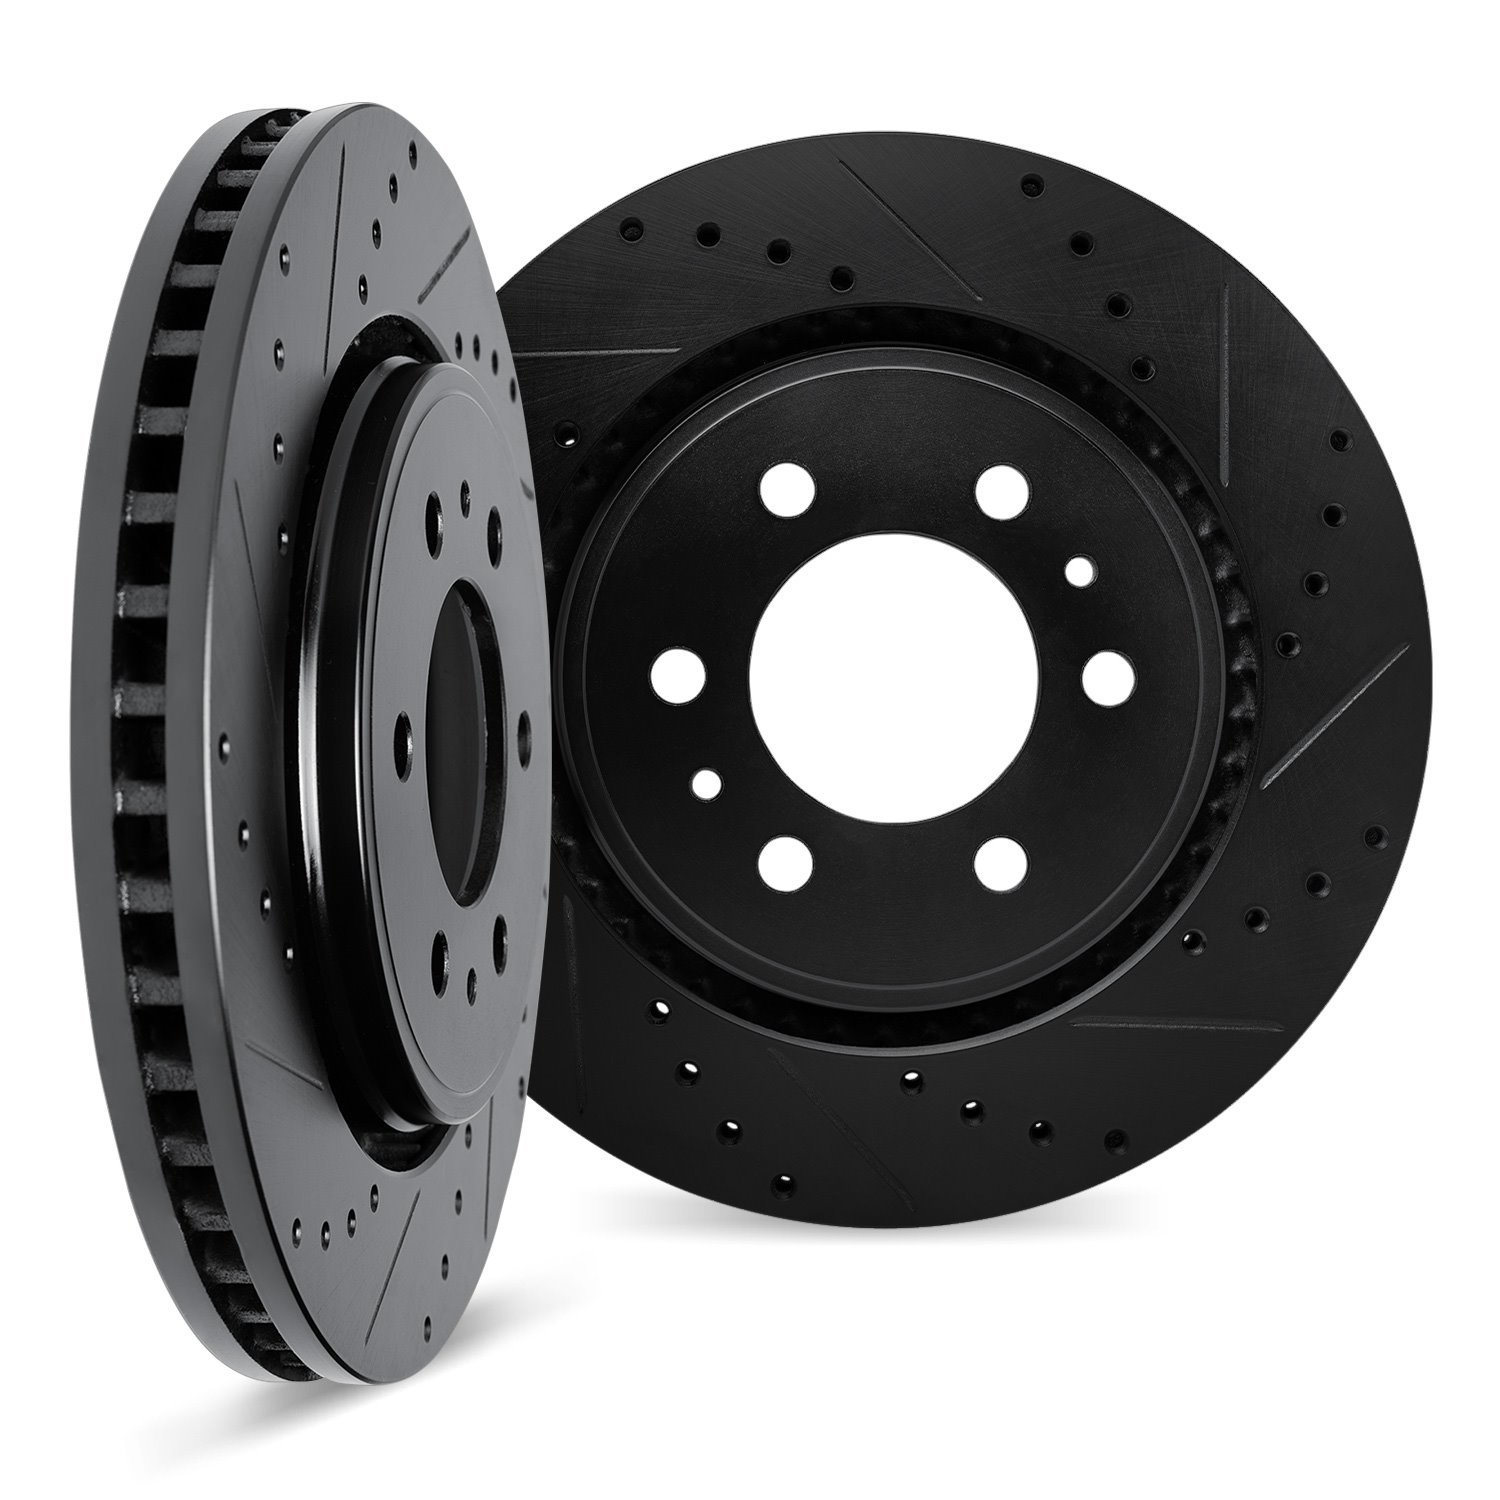 8002-92040 Drilled/Slotted Brake Rotors [Black], 2008-2016 Infiniti/Nissan, Position: Front